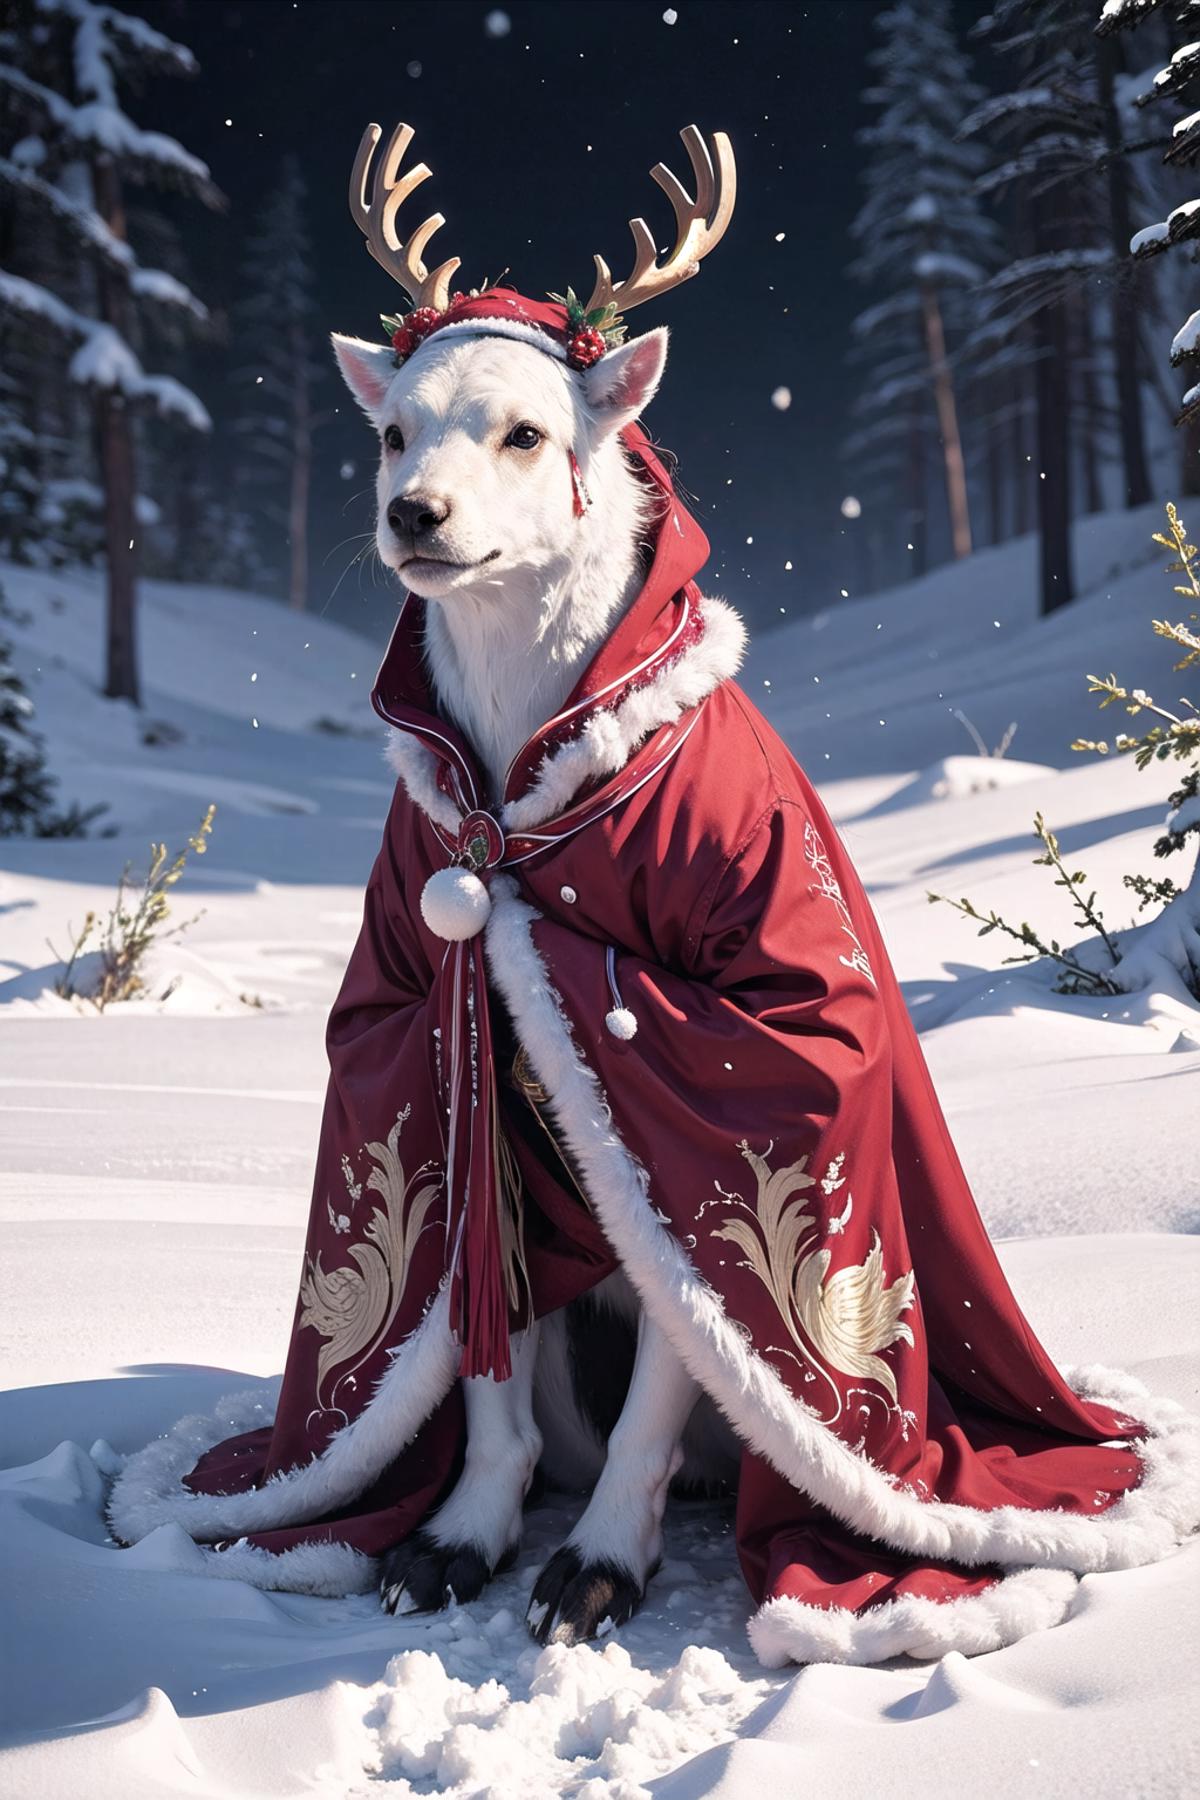 A white dog with a red coat and hat.